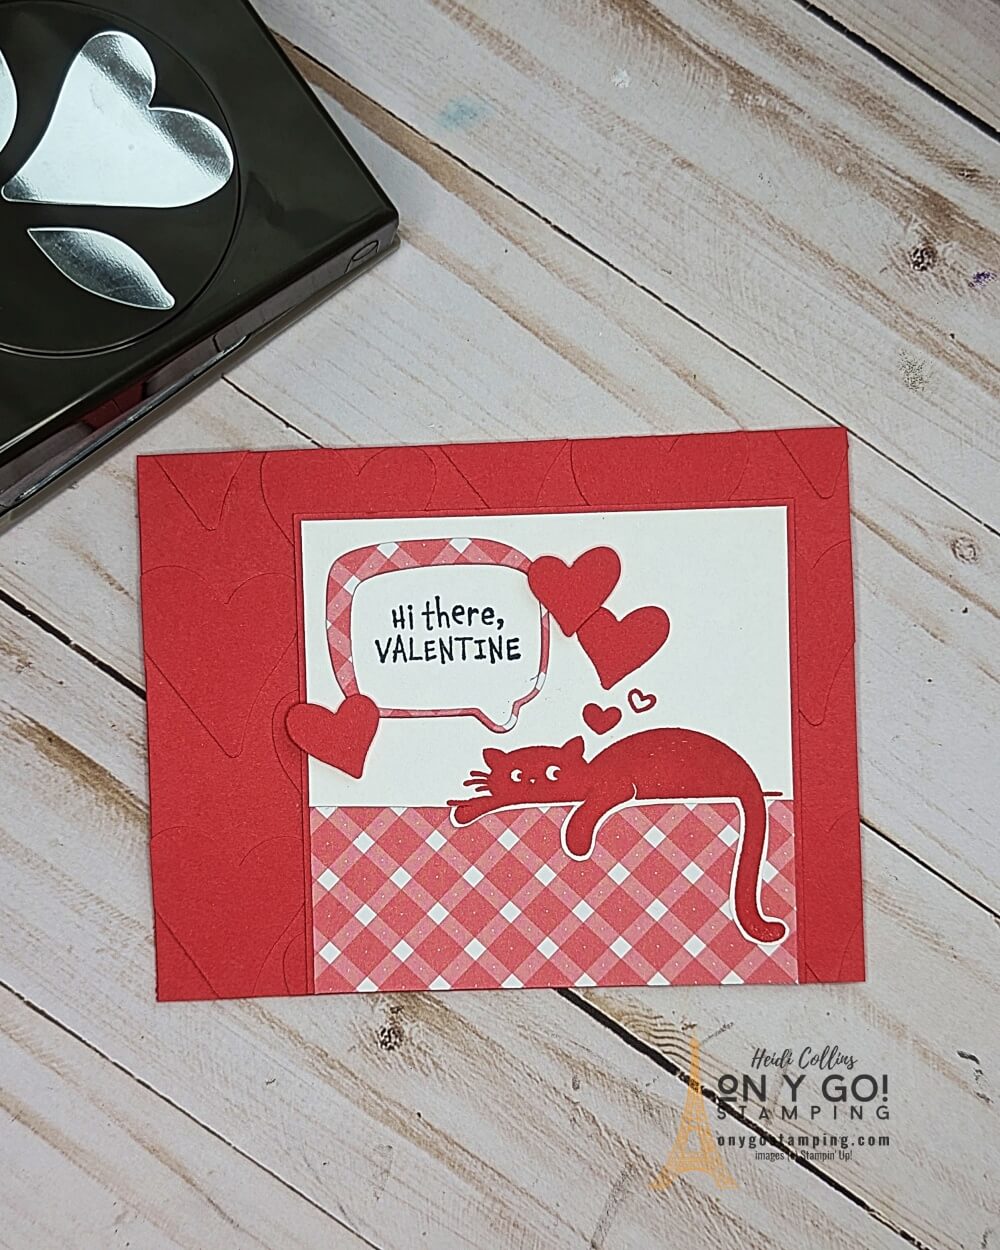 Valentine's Day is the perfect time to let someone know how important they are to you - and what better way to do that than with handmade cards? Whether you're a cat lover, a fan of delicate country gingham, or a lover of patterned paper, we've got the perfect Valentine's Day cards for you. The Love Cats stamp set, Country Gingham, and patterned paper from Stampin' Up! make it easy to create beautiful, heartfelt cards that your special someone is sure to love.